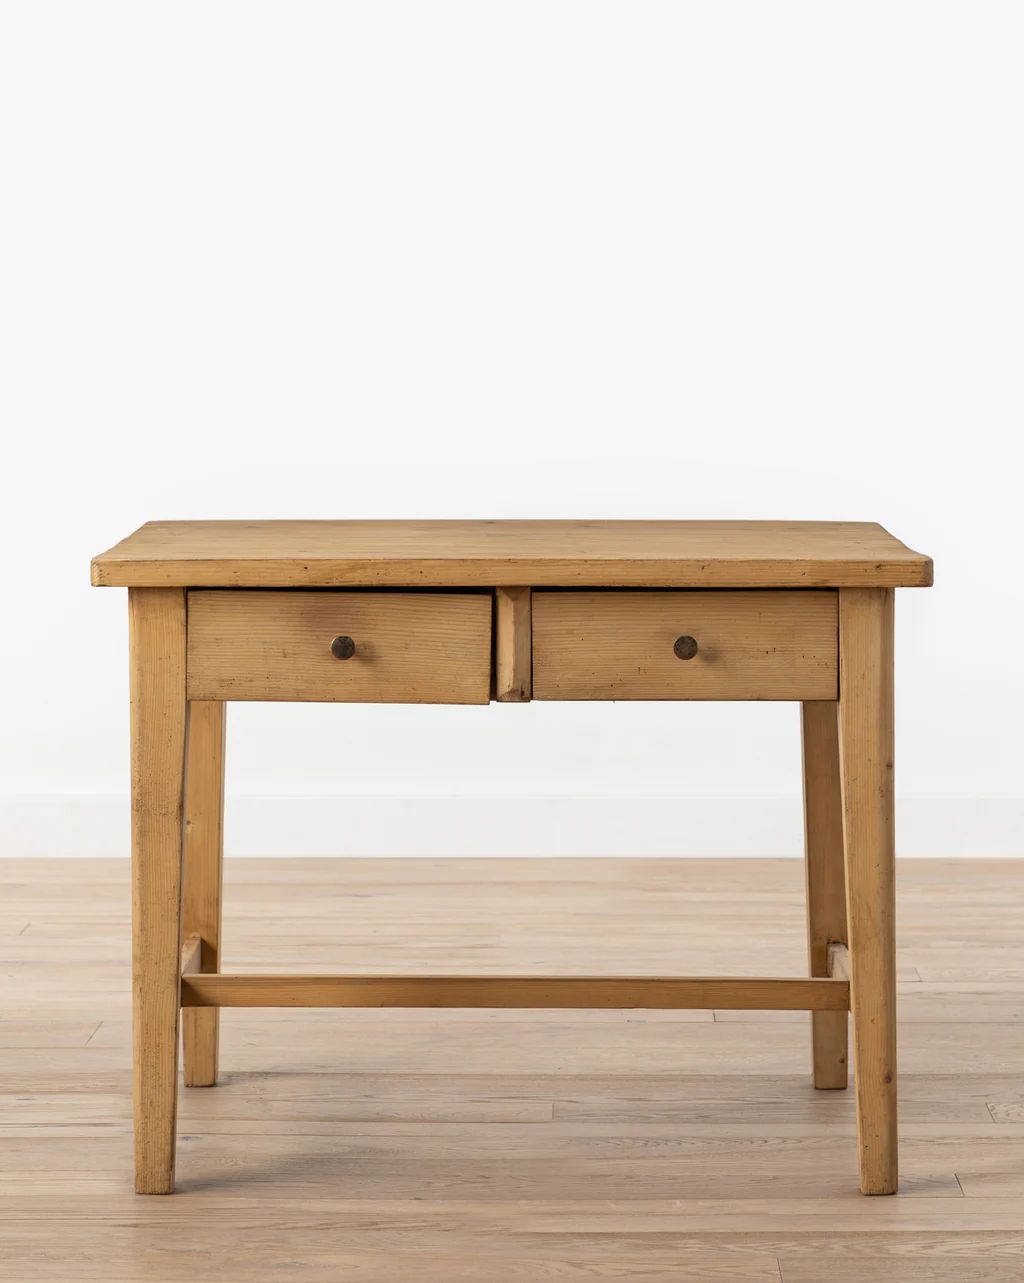 Vintage Pine Table with Two Drawers | McGee & Co.